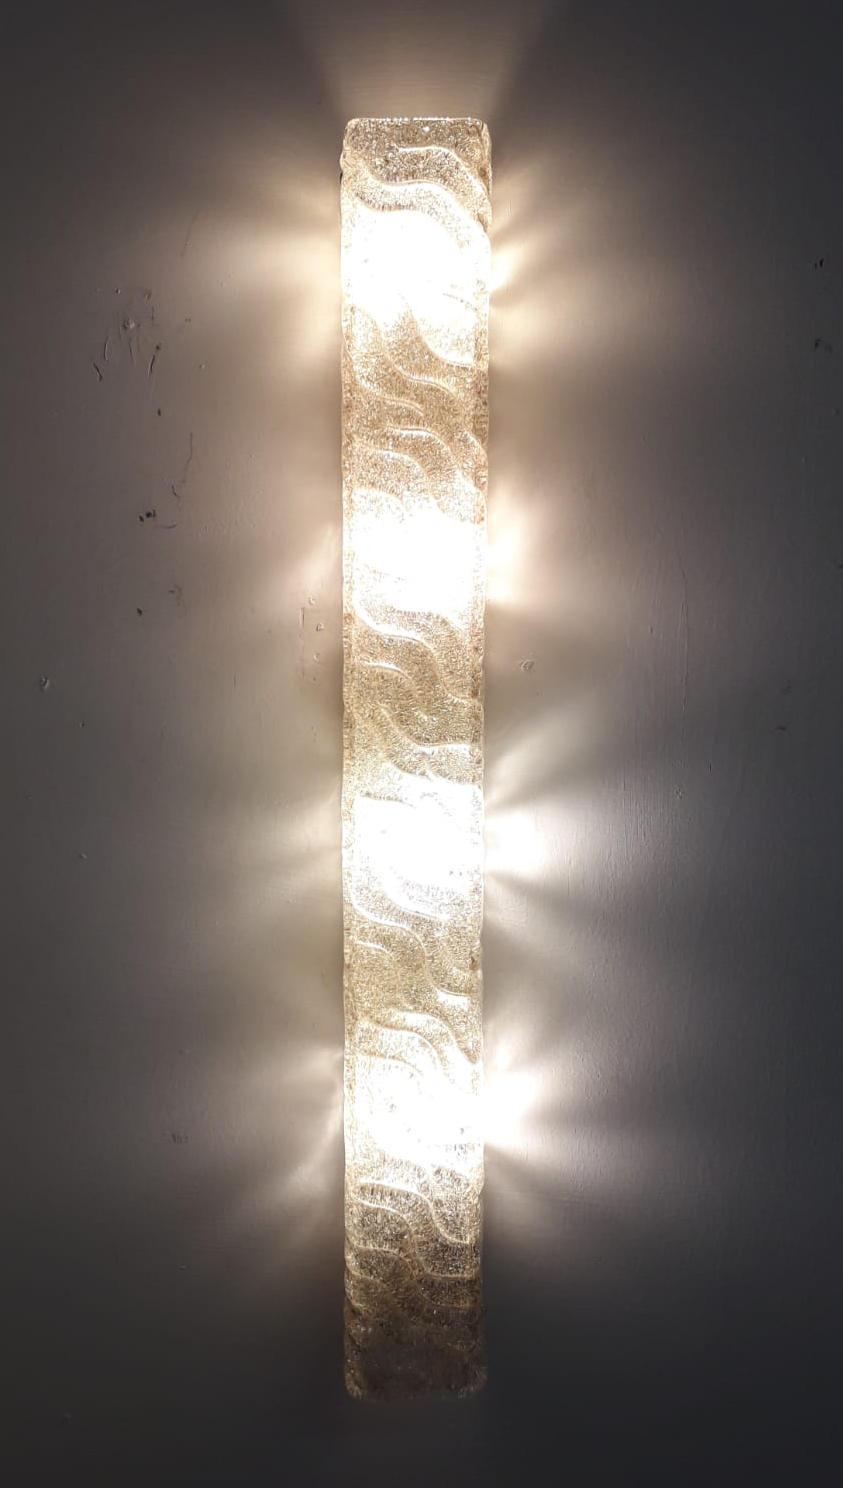 Mid-Century Modern Long Canale Sconce by Barovier e Toso - LAST 1 IN STOCK